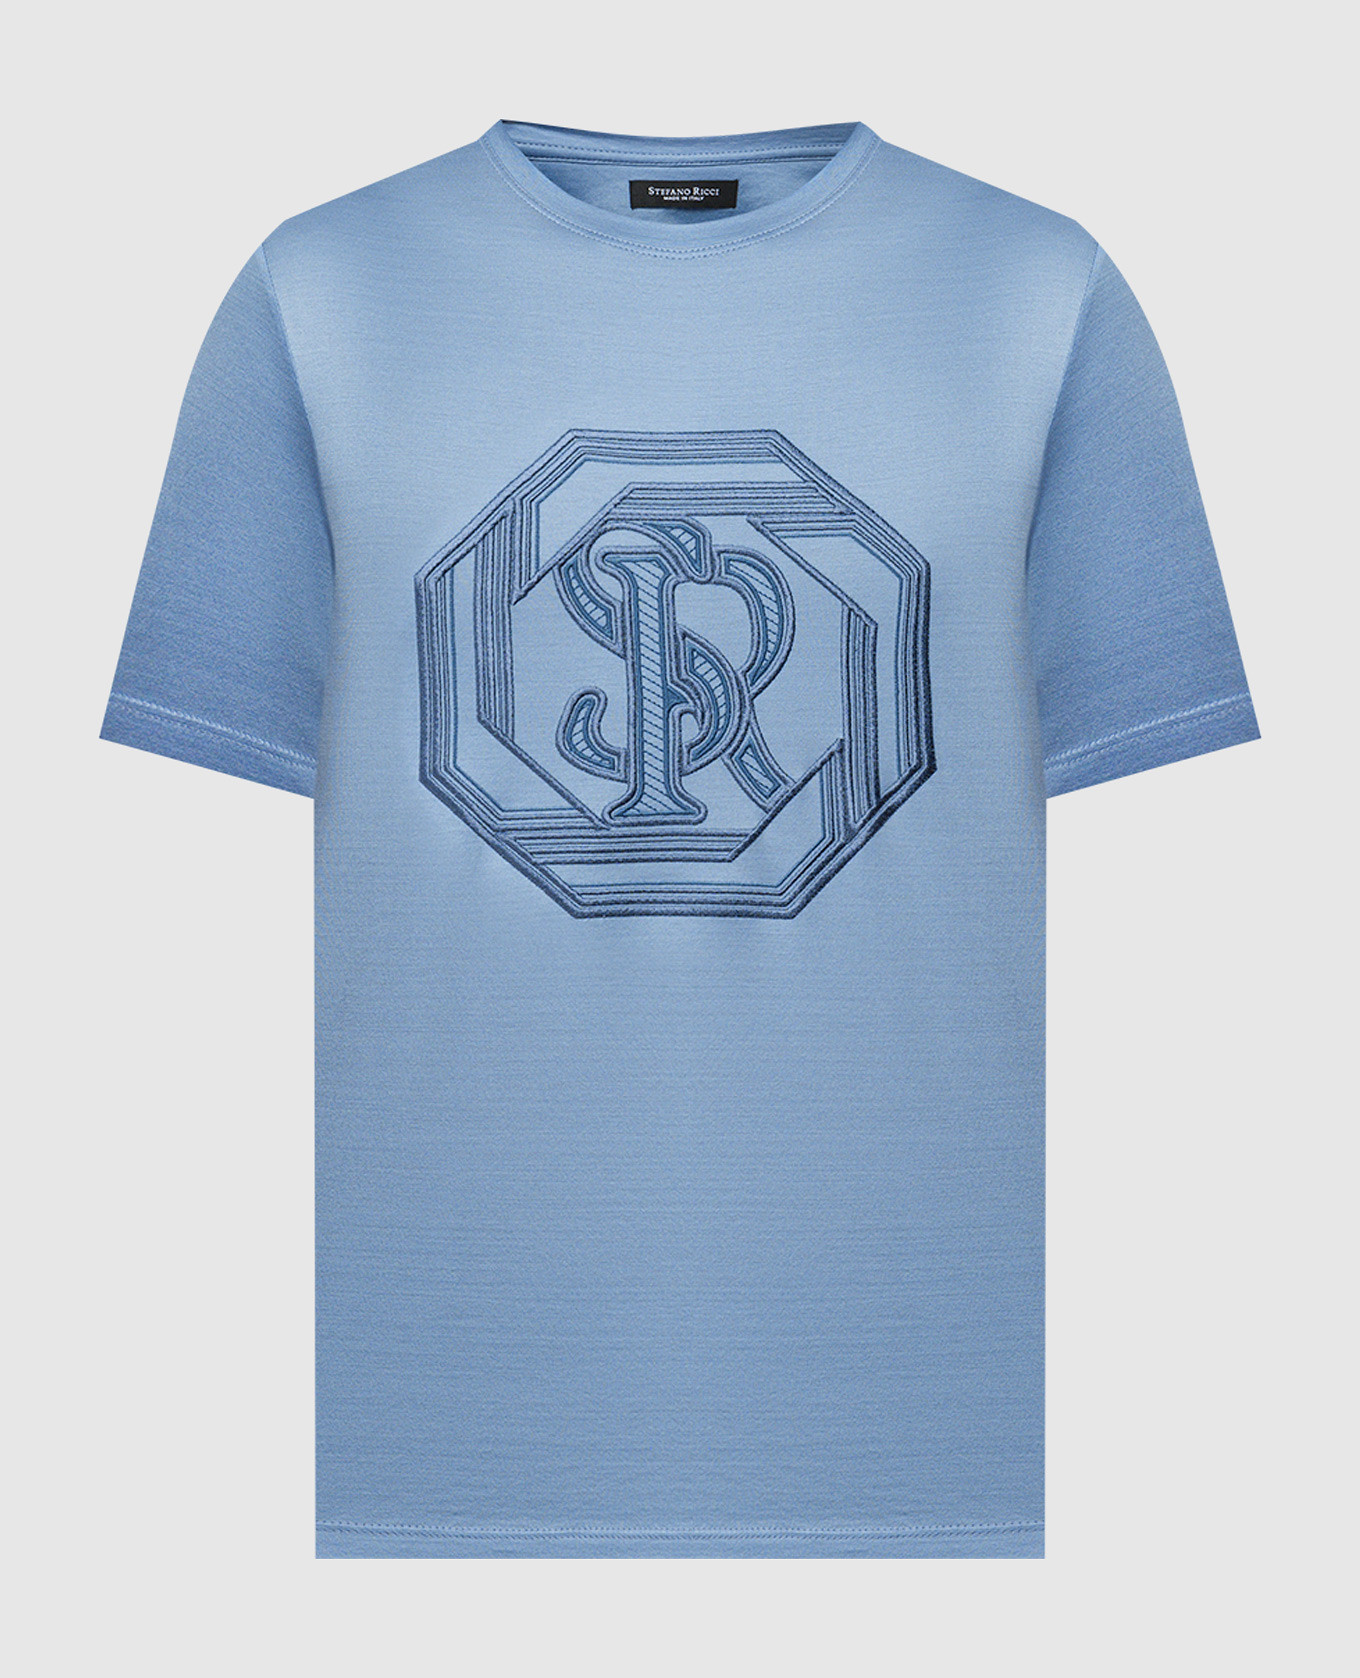 Blue t-shirt with logo monogram embroidery